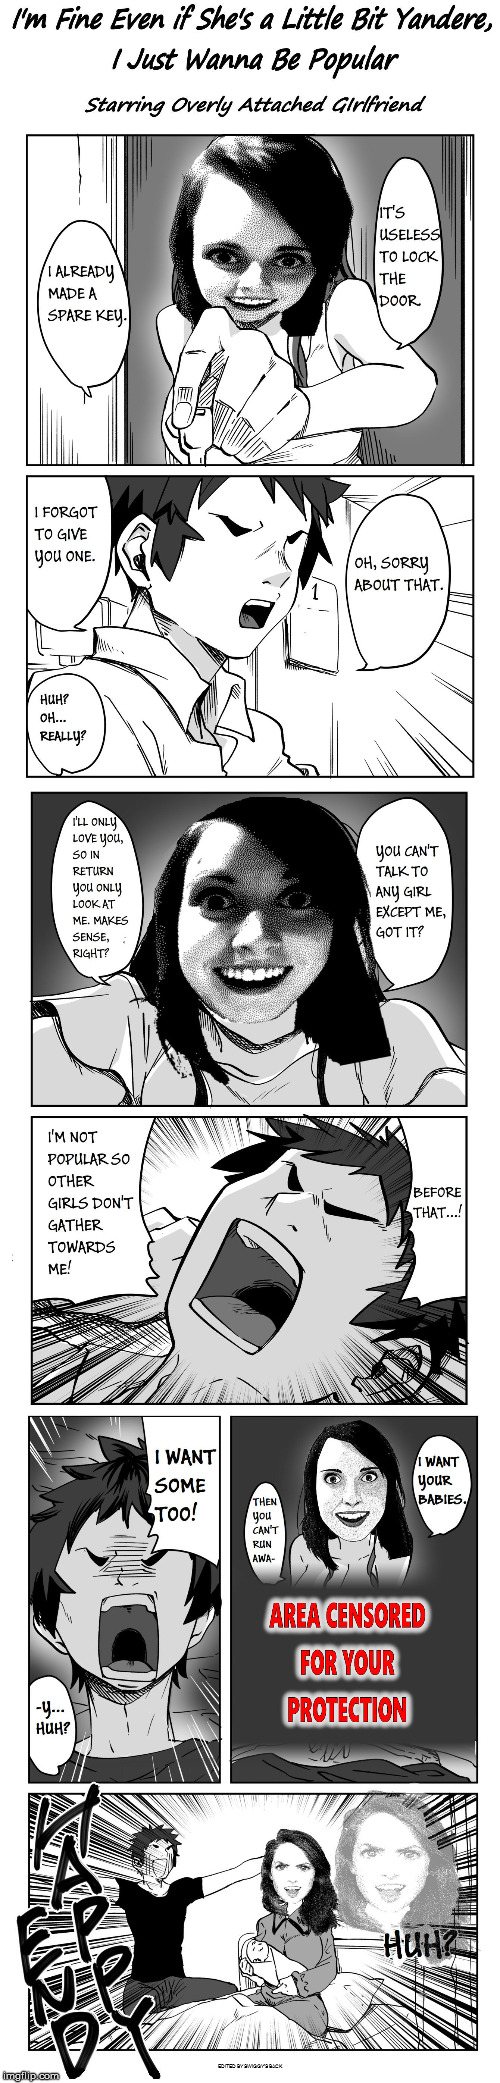 Found A Manga That Screamed Overly Attached Girlfriend Put My Paint Shop Pro To Work Imgflip